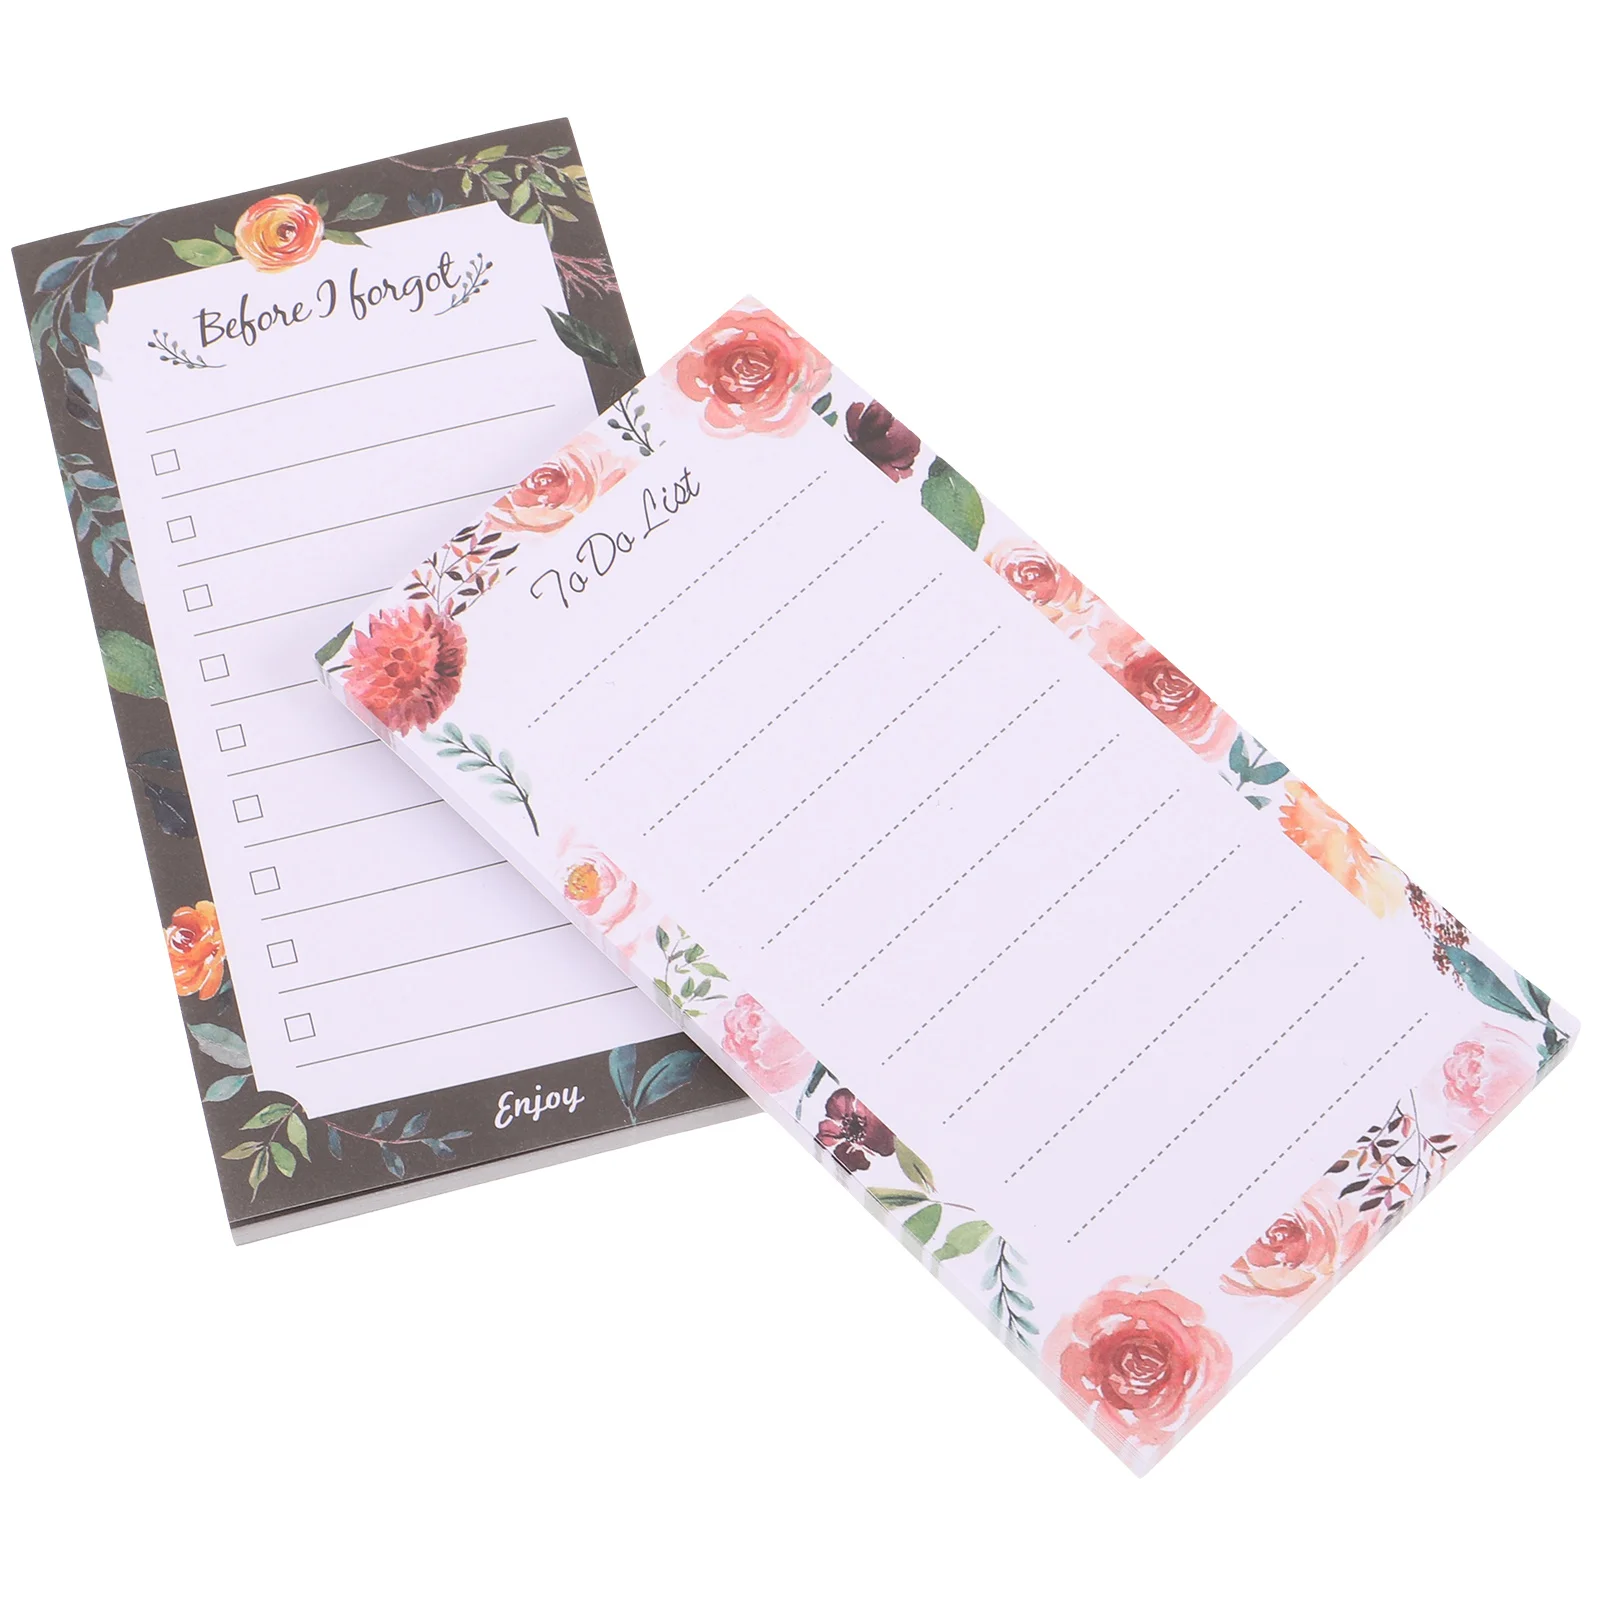 2 Pcs Magnetic Notepad Memo Notepads Fridge Small Notebook with Grocery List Soft to Do 6pcs magnetic notepads grocery list shopping list notepads with magnet fridge memo notepads